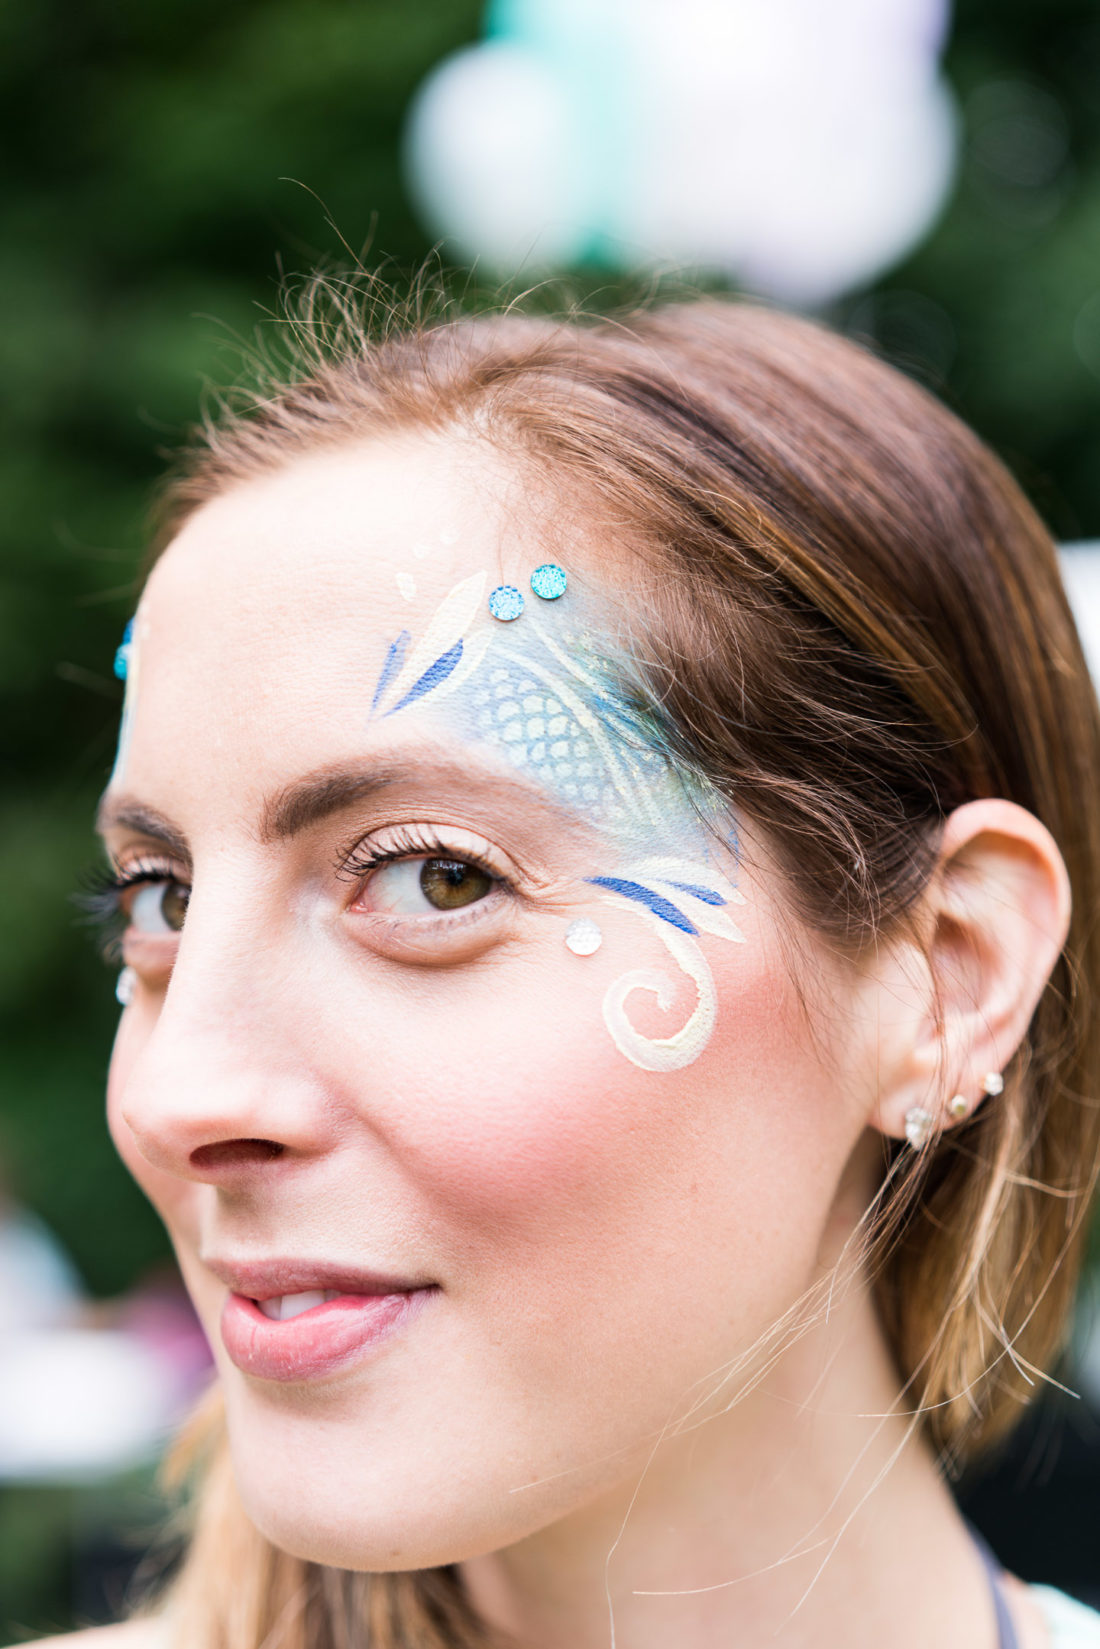 Eva Amurri Martino gets her face painted like a mermaid at her daughter Marlowe's third birthday party